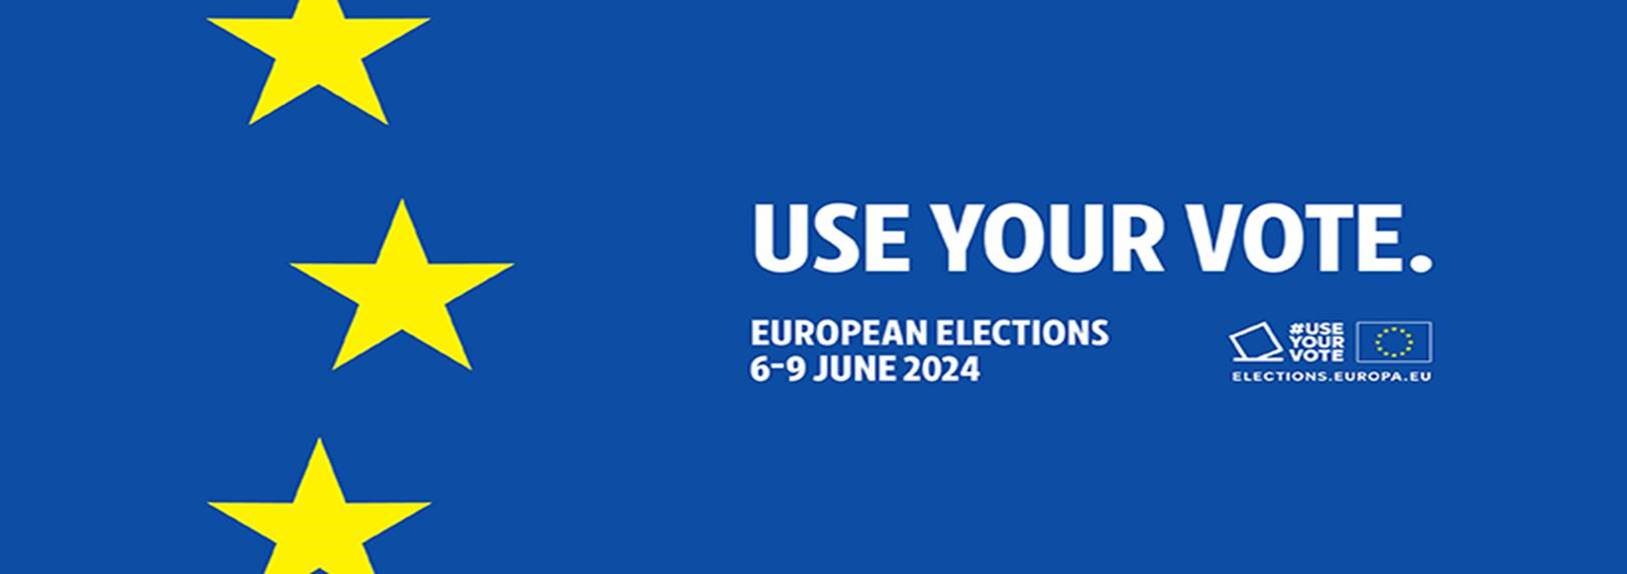 use your vote european elections 6 to 9 june 2024